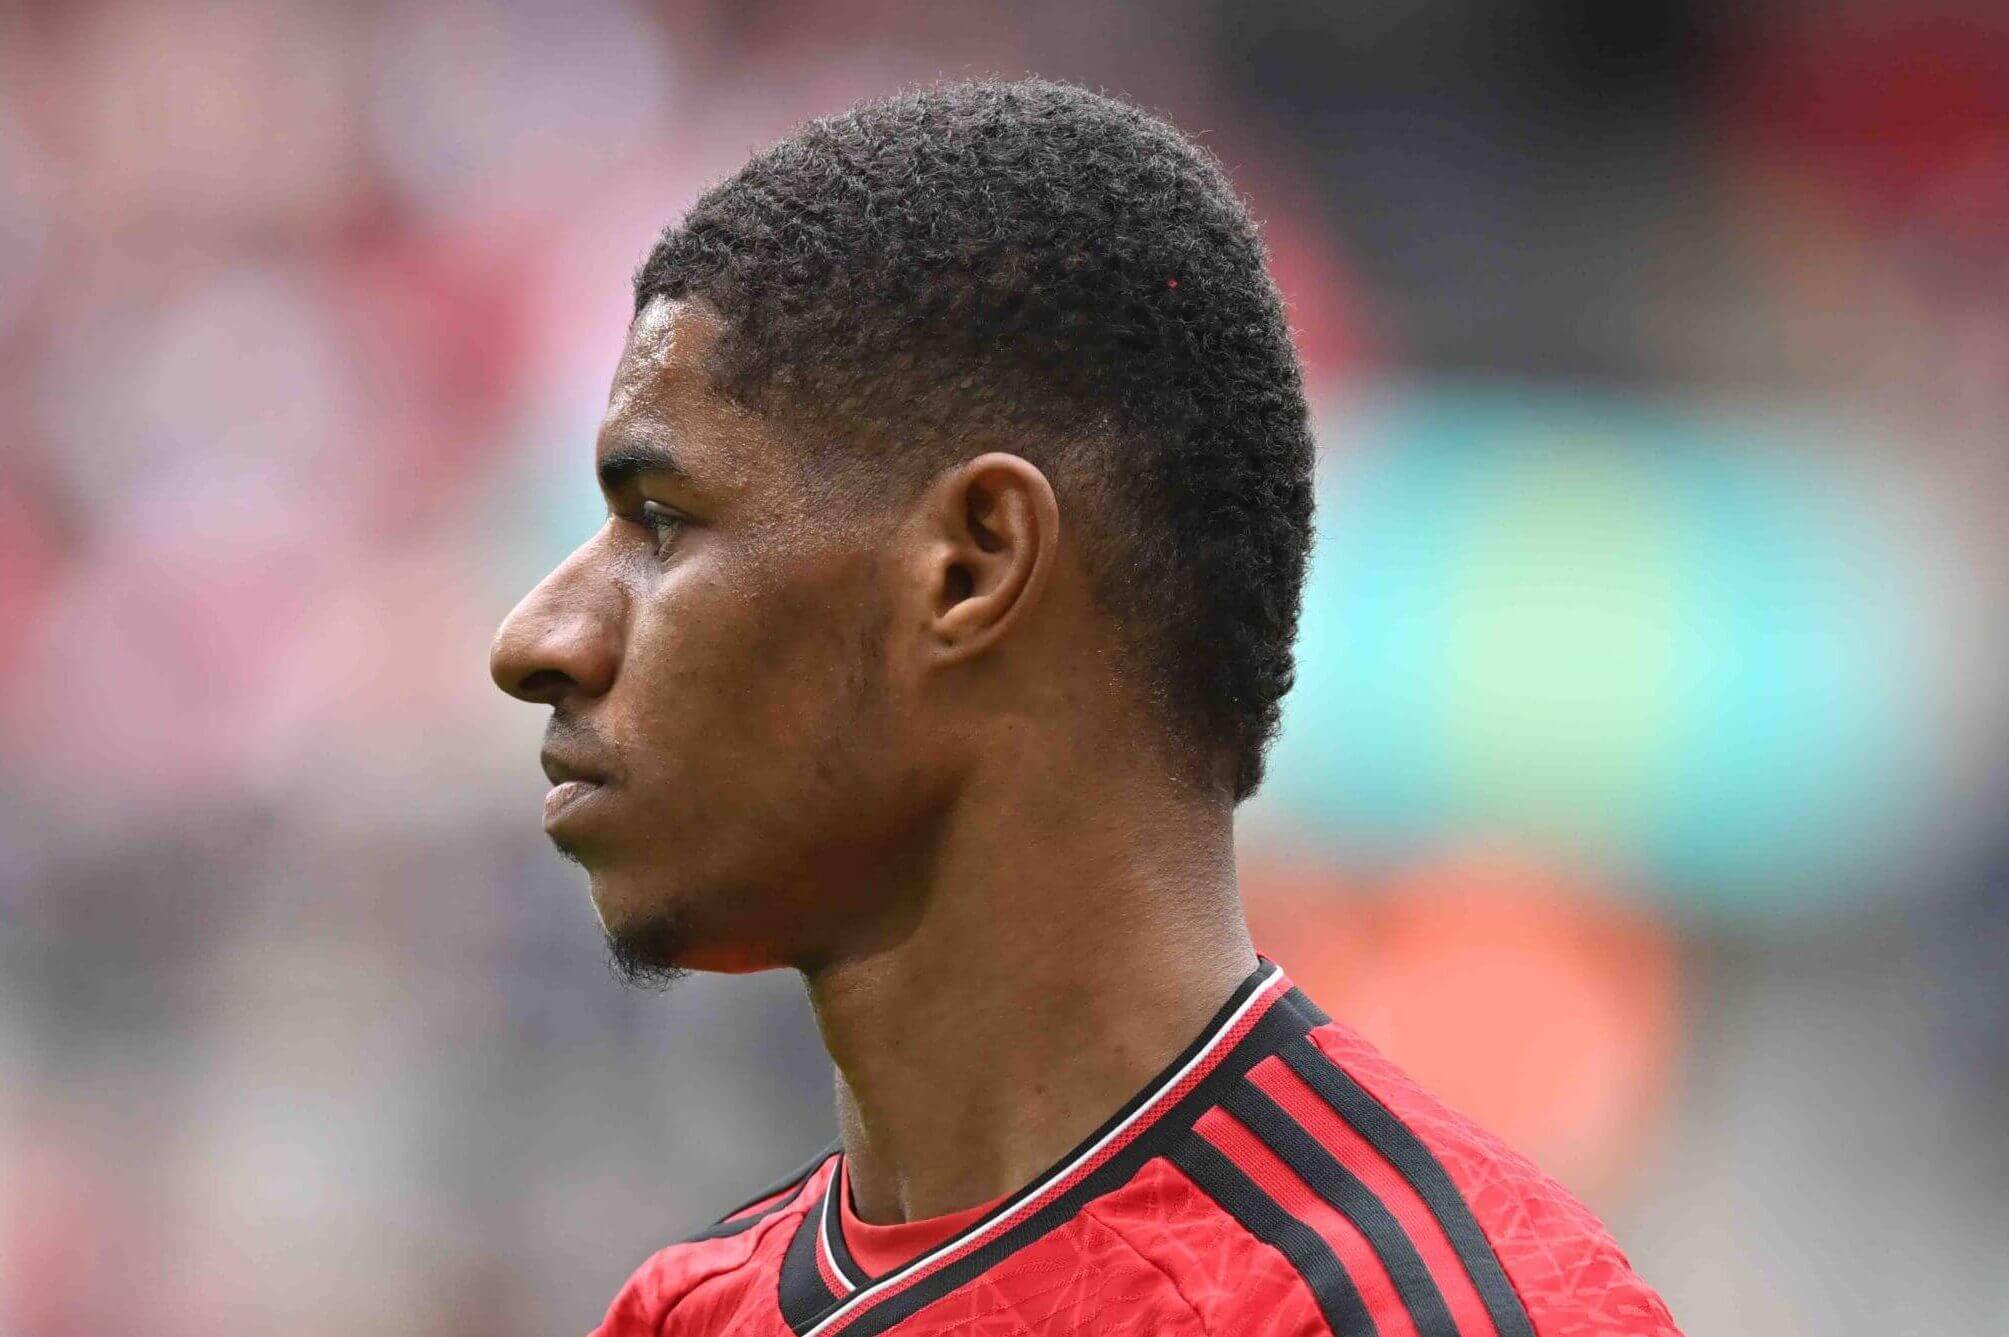 Marcus Rashford leaving Manchester United would be hard – but maybe for the best